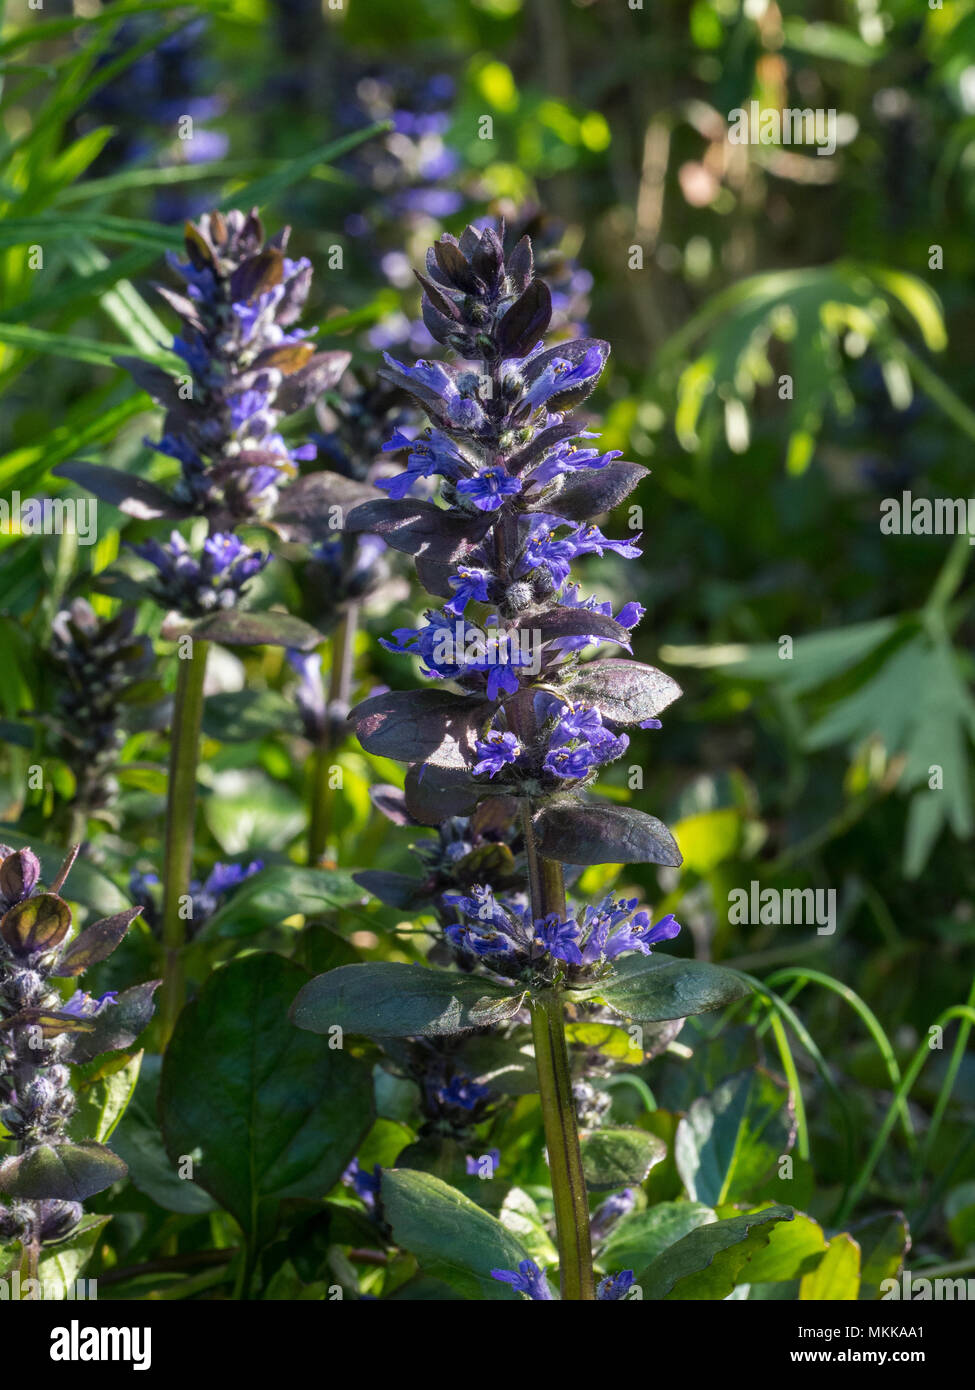 A single flower spike of Ajuga reptans Catlins Giant with other spikes in the background Stock Photo